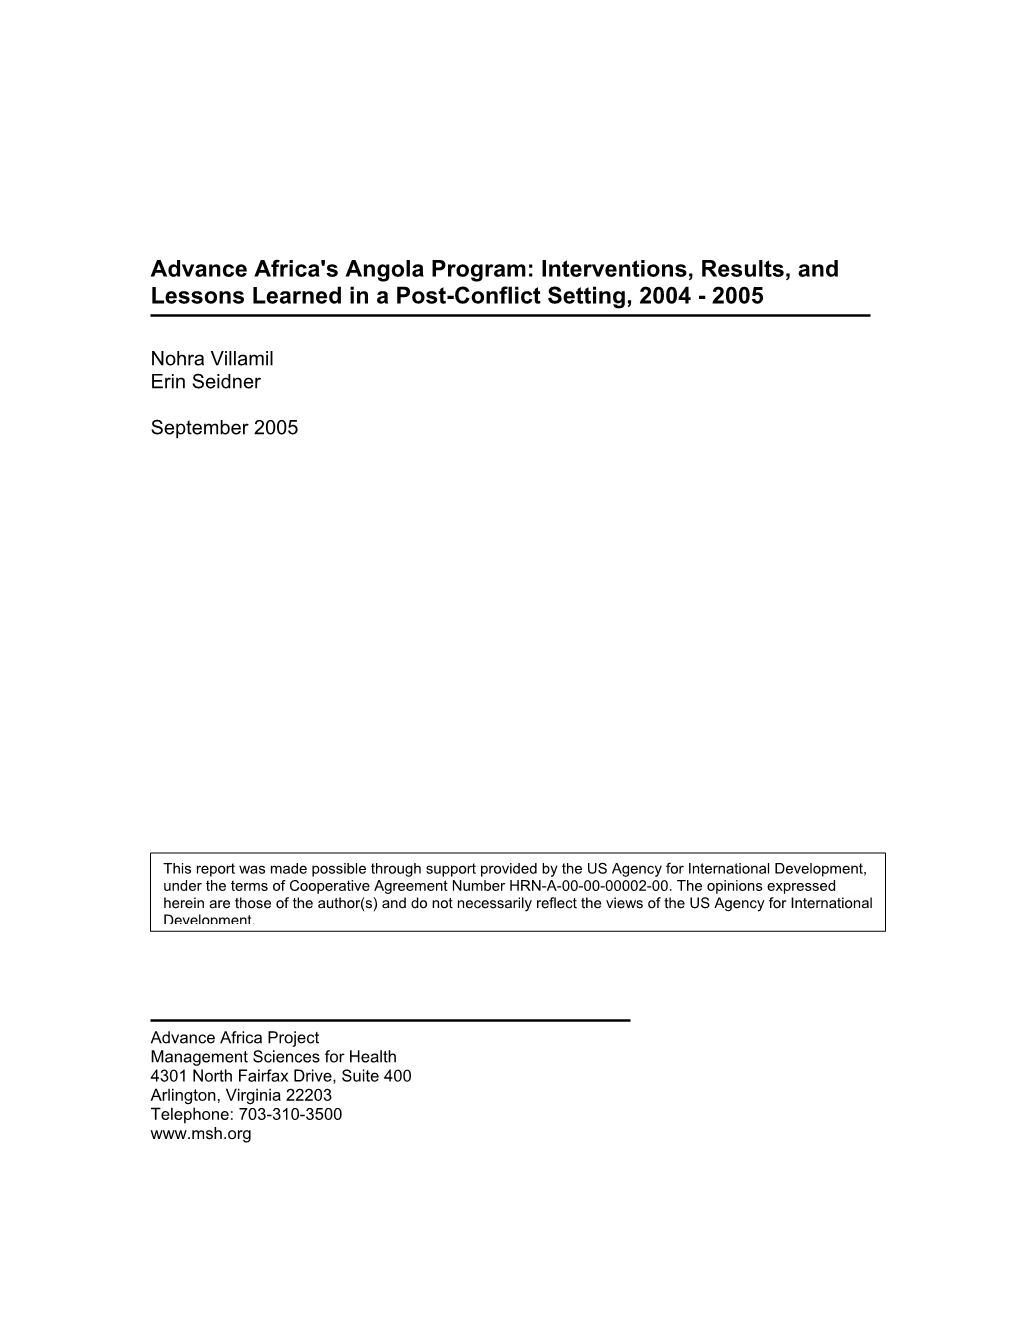 Advance Africa's Angola Program: Interventions, Results, and Lessons Learned in a Post-Conflict Setting, 2004 - 2005